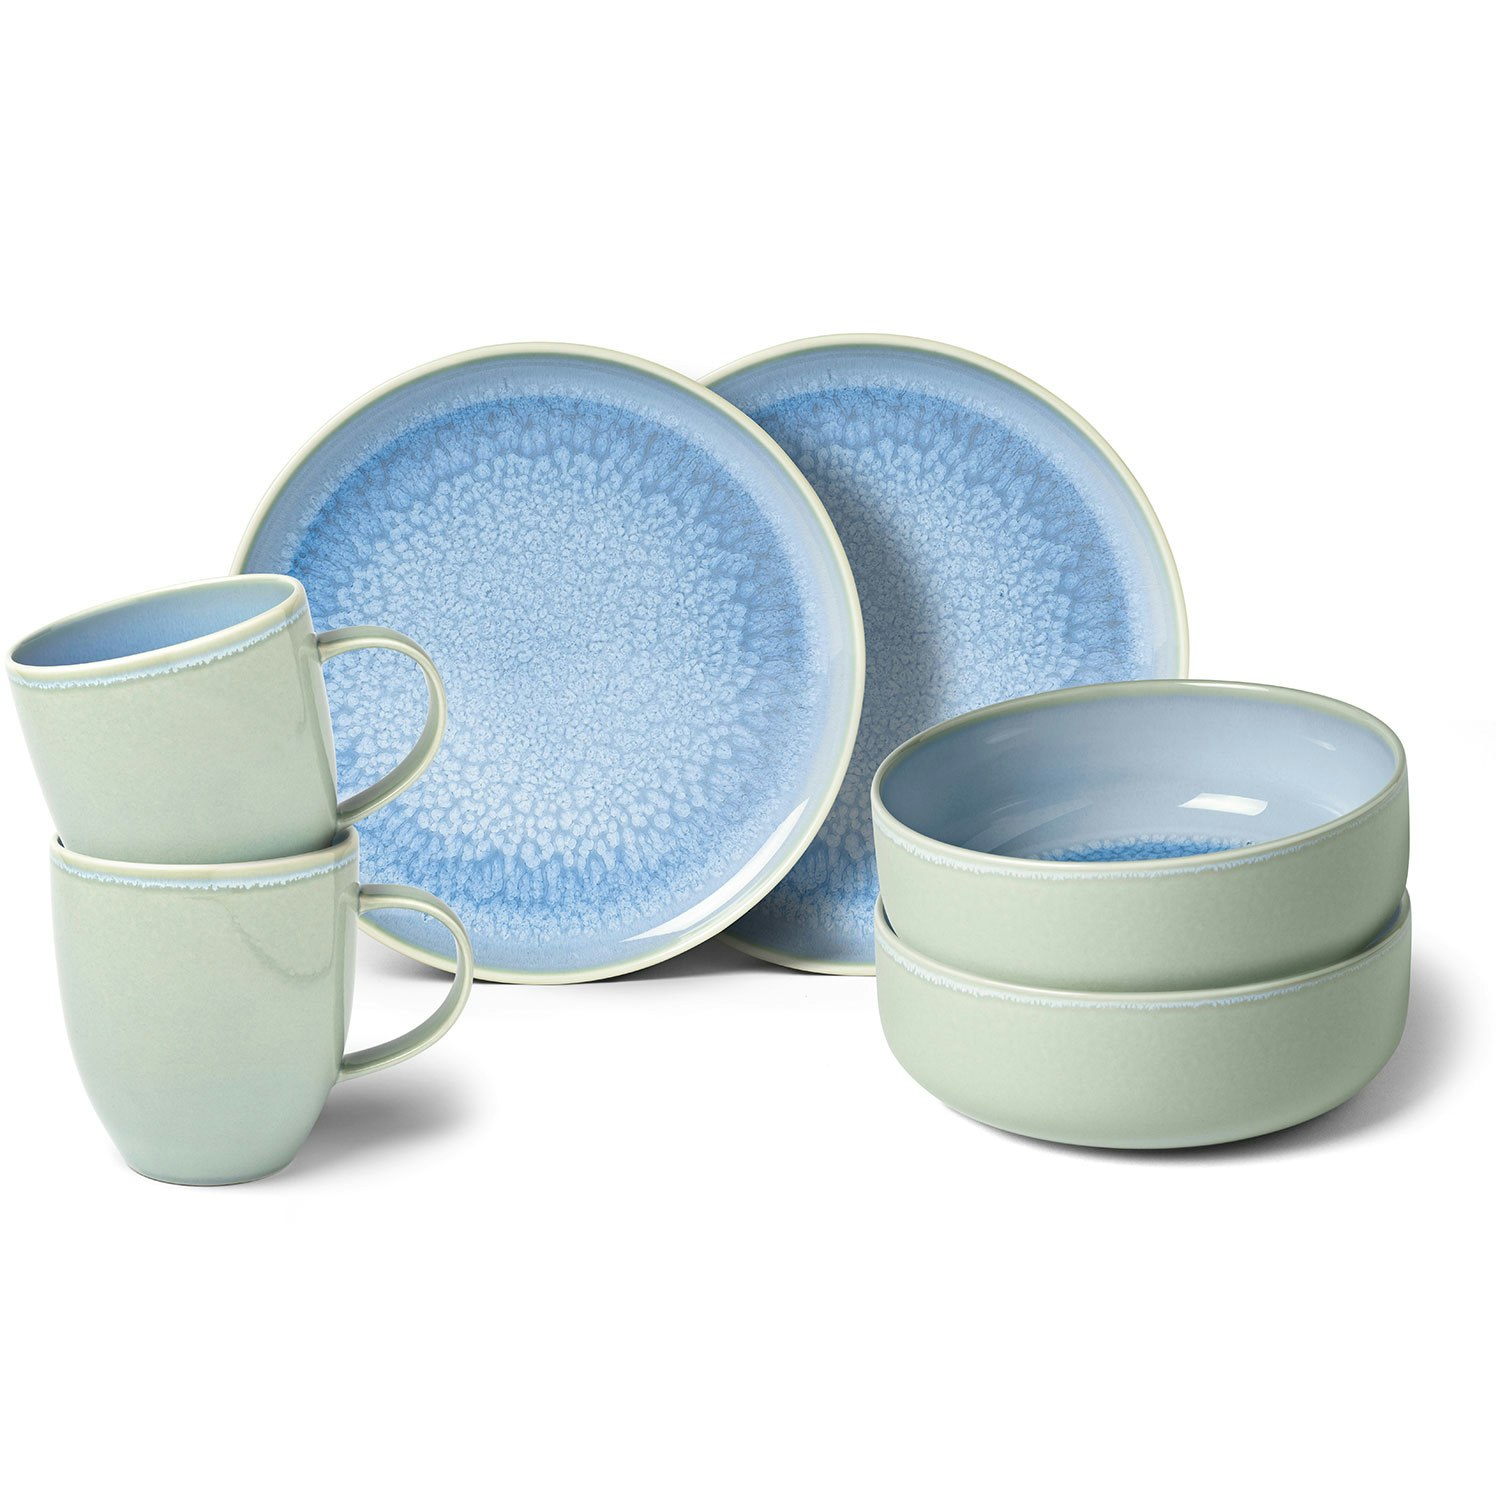 Lidia's Kitchen 4-piece Cup and Saucer Set